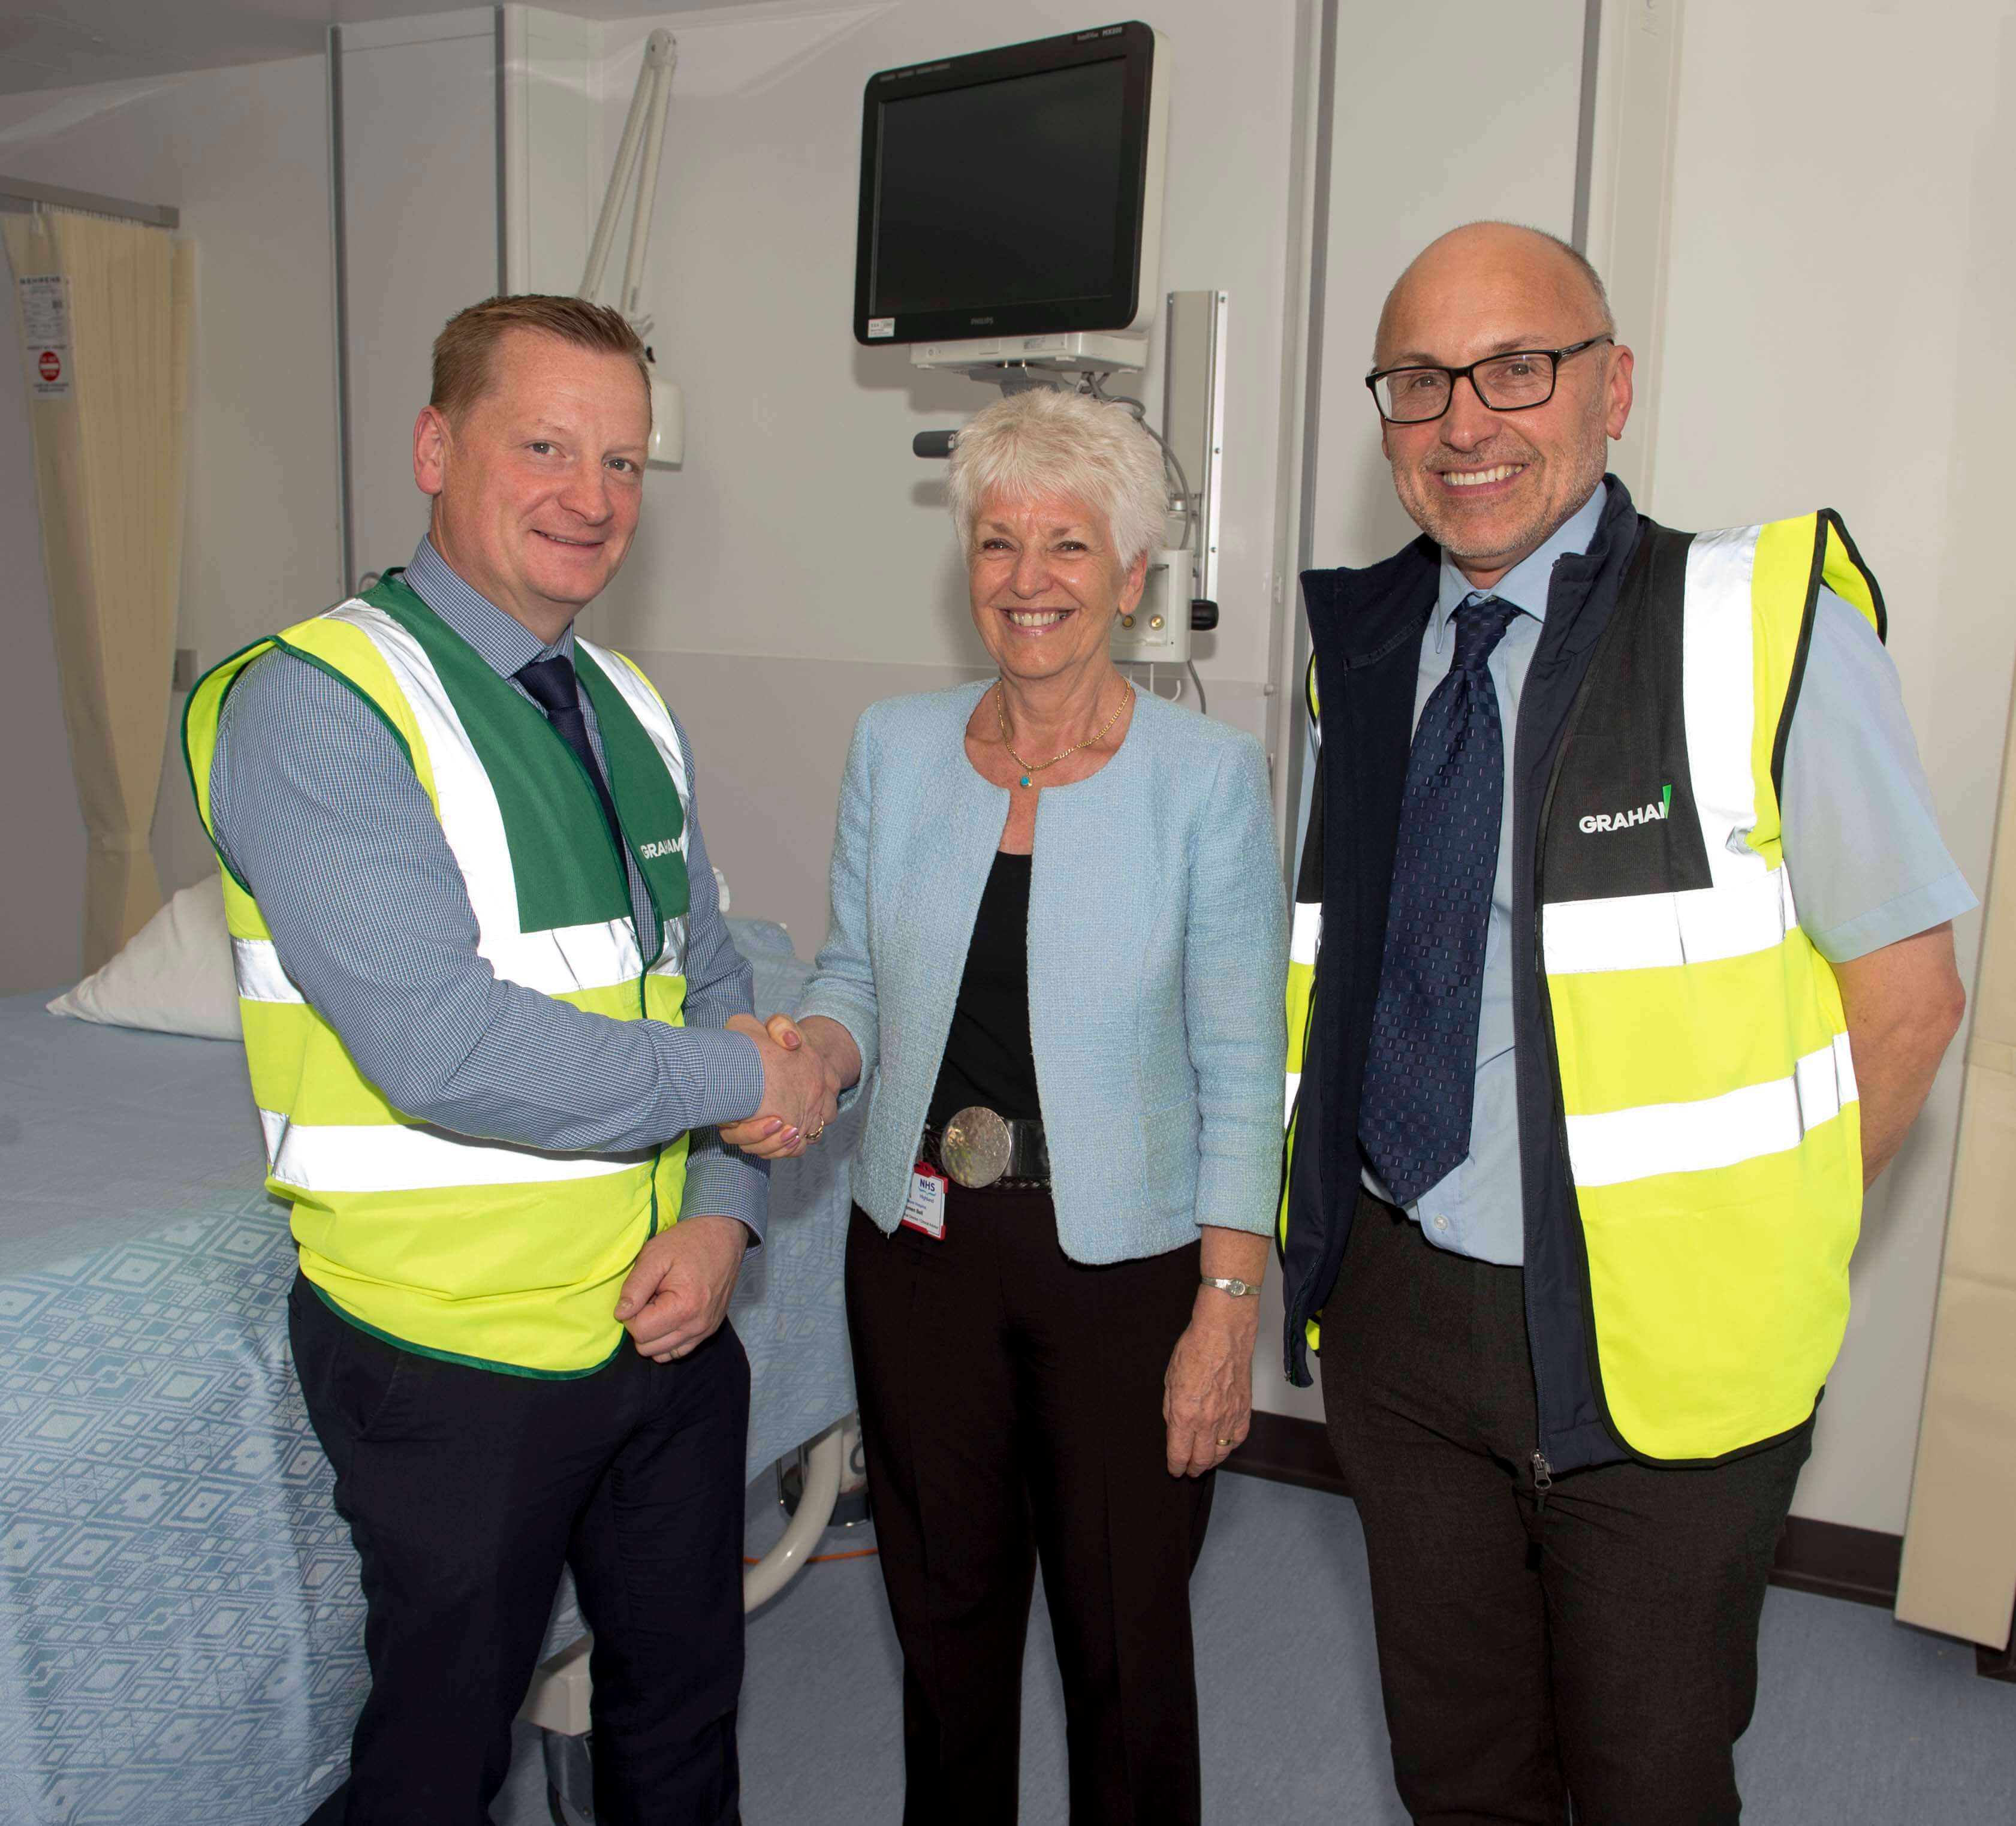 GRAHAM hands over phase one of Raigmore Hospital image